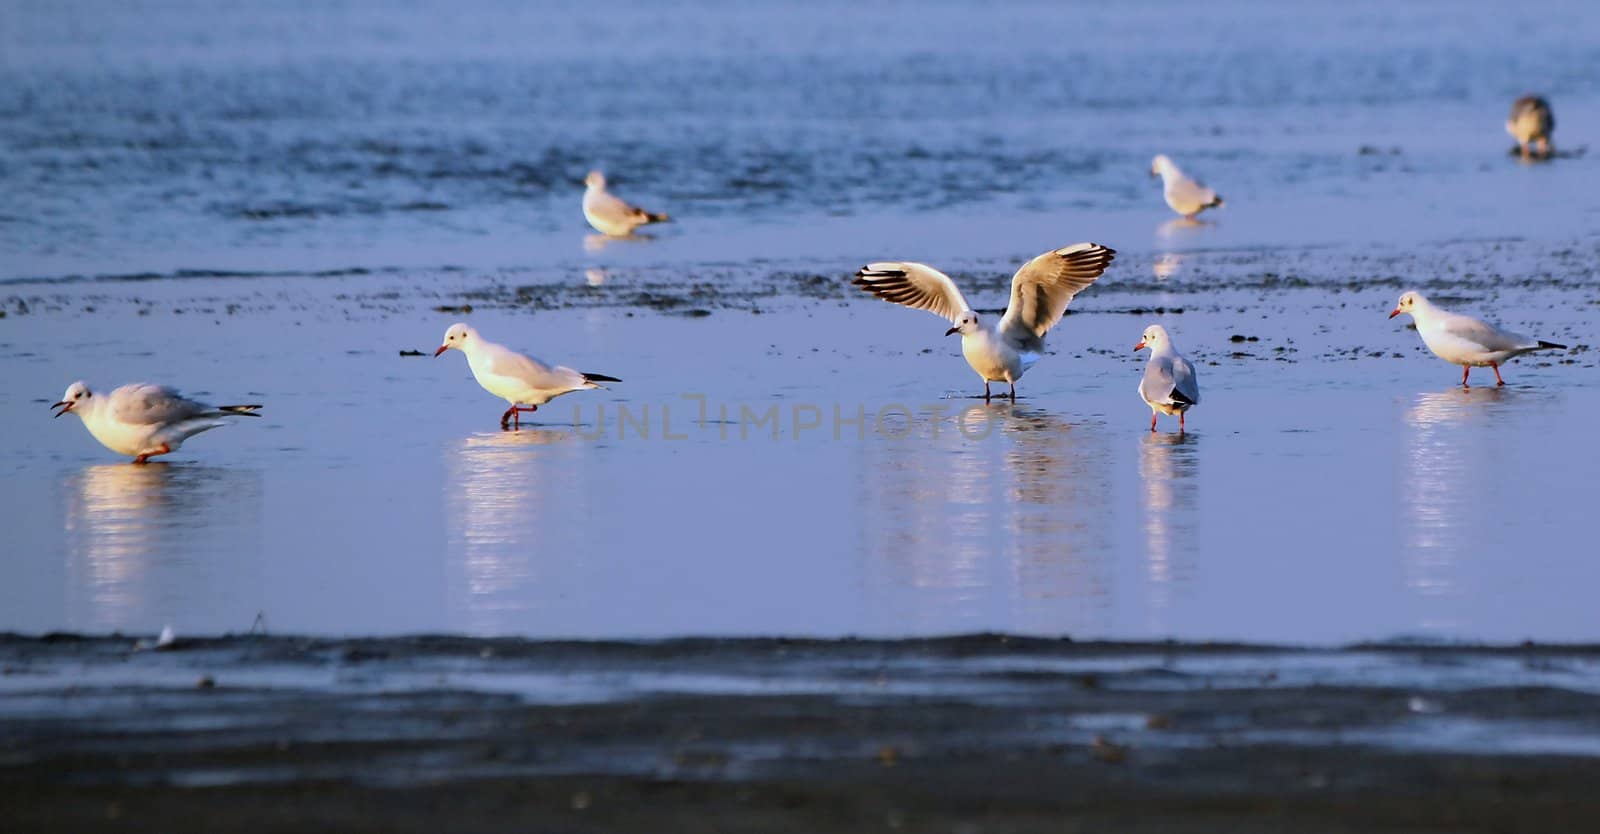 Group of seagulls standing on water, one with wings open, by sunset